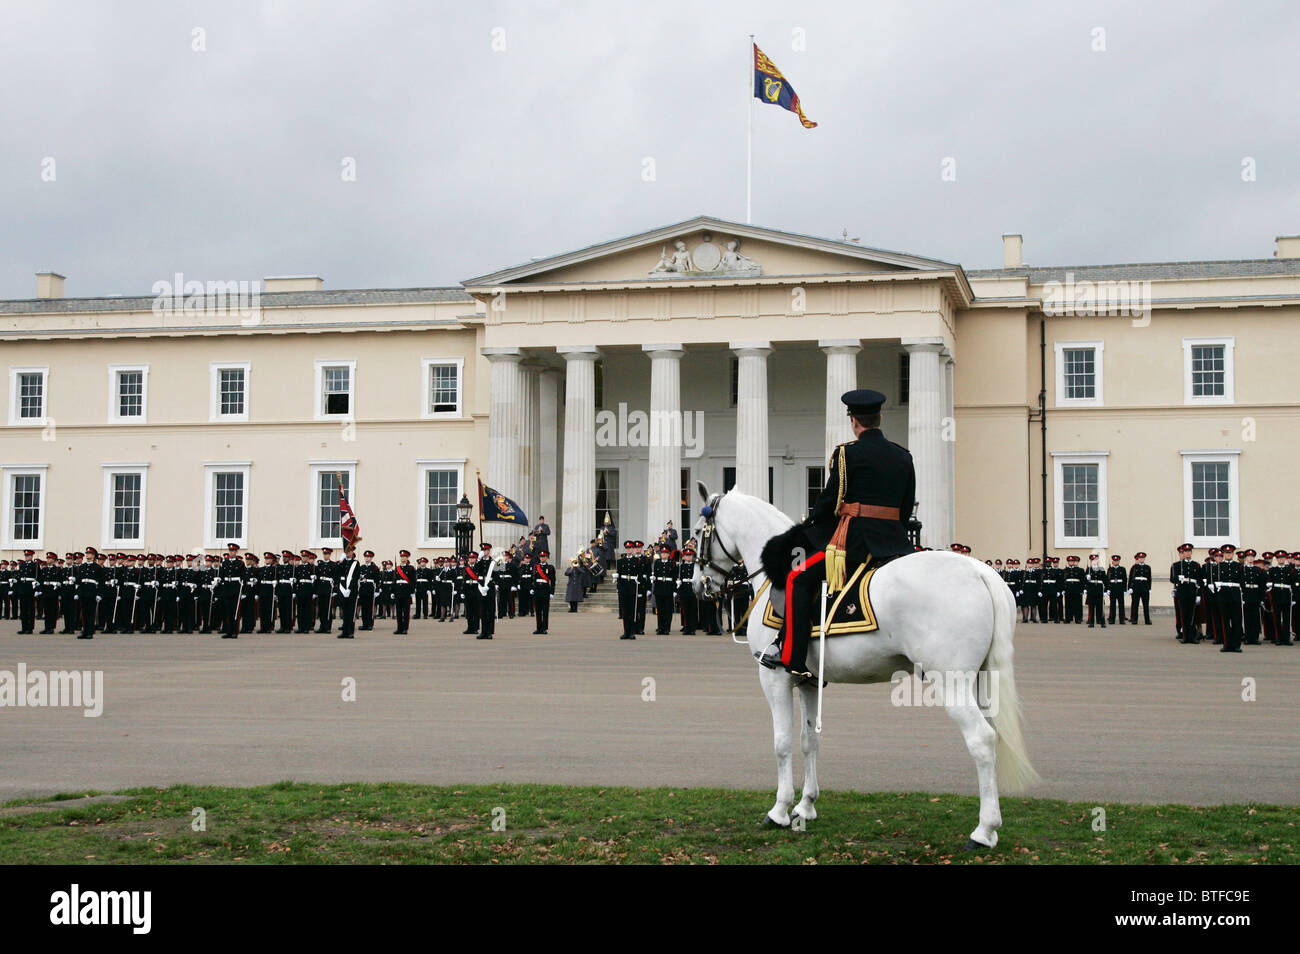 The Colonel leads officer cadets at the Passing Out Parade at Sandhurst Royal Military Academy, Surrey, UK Stock Photo